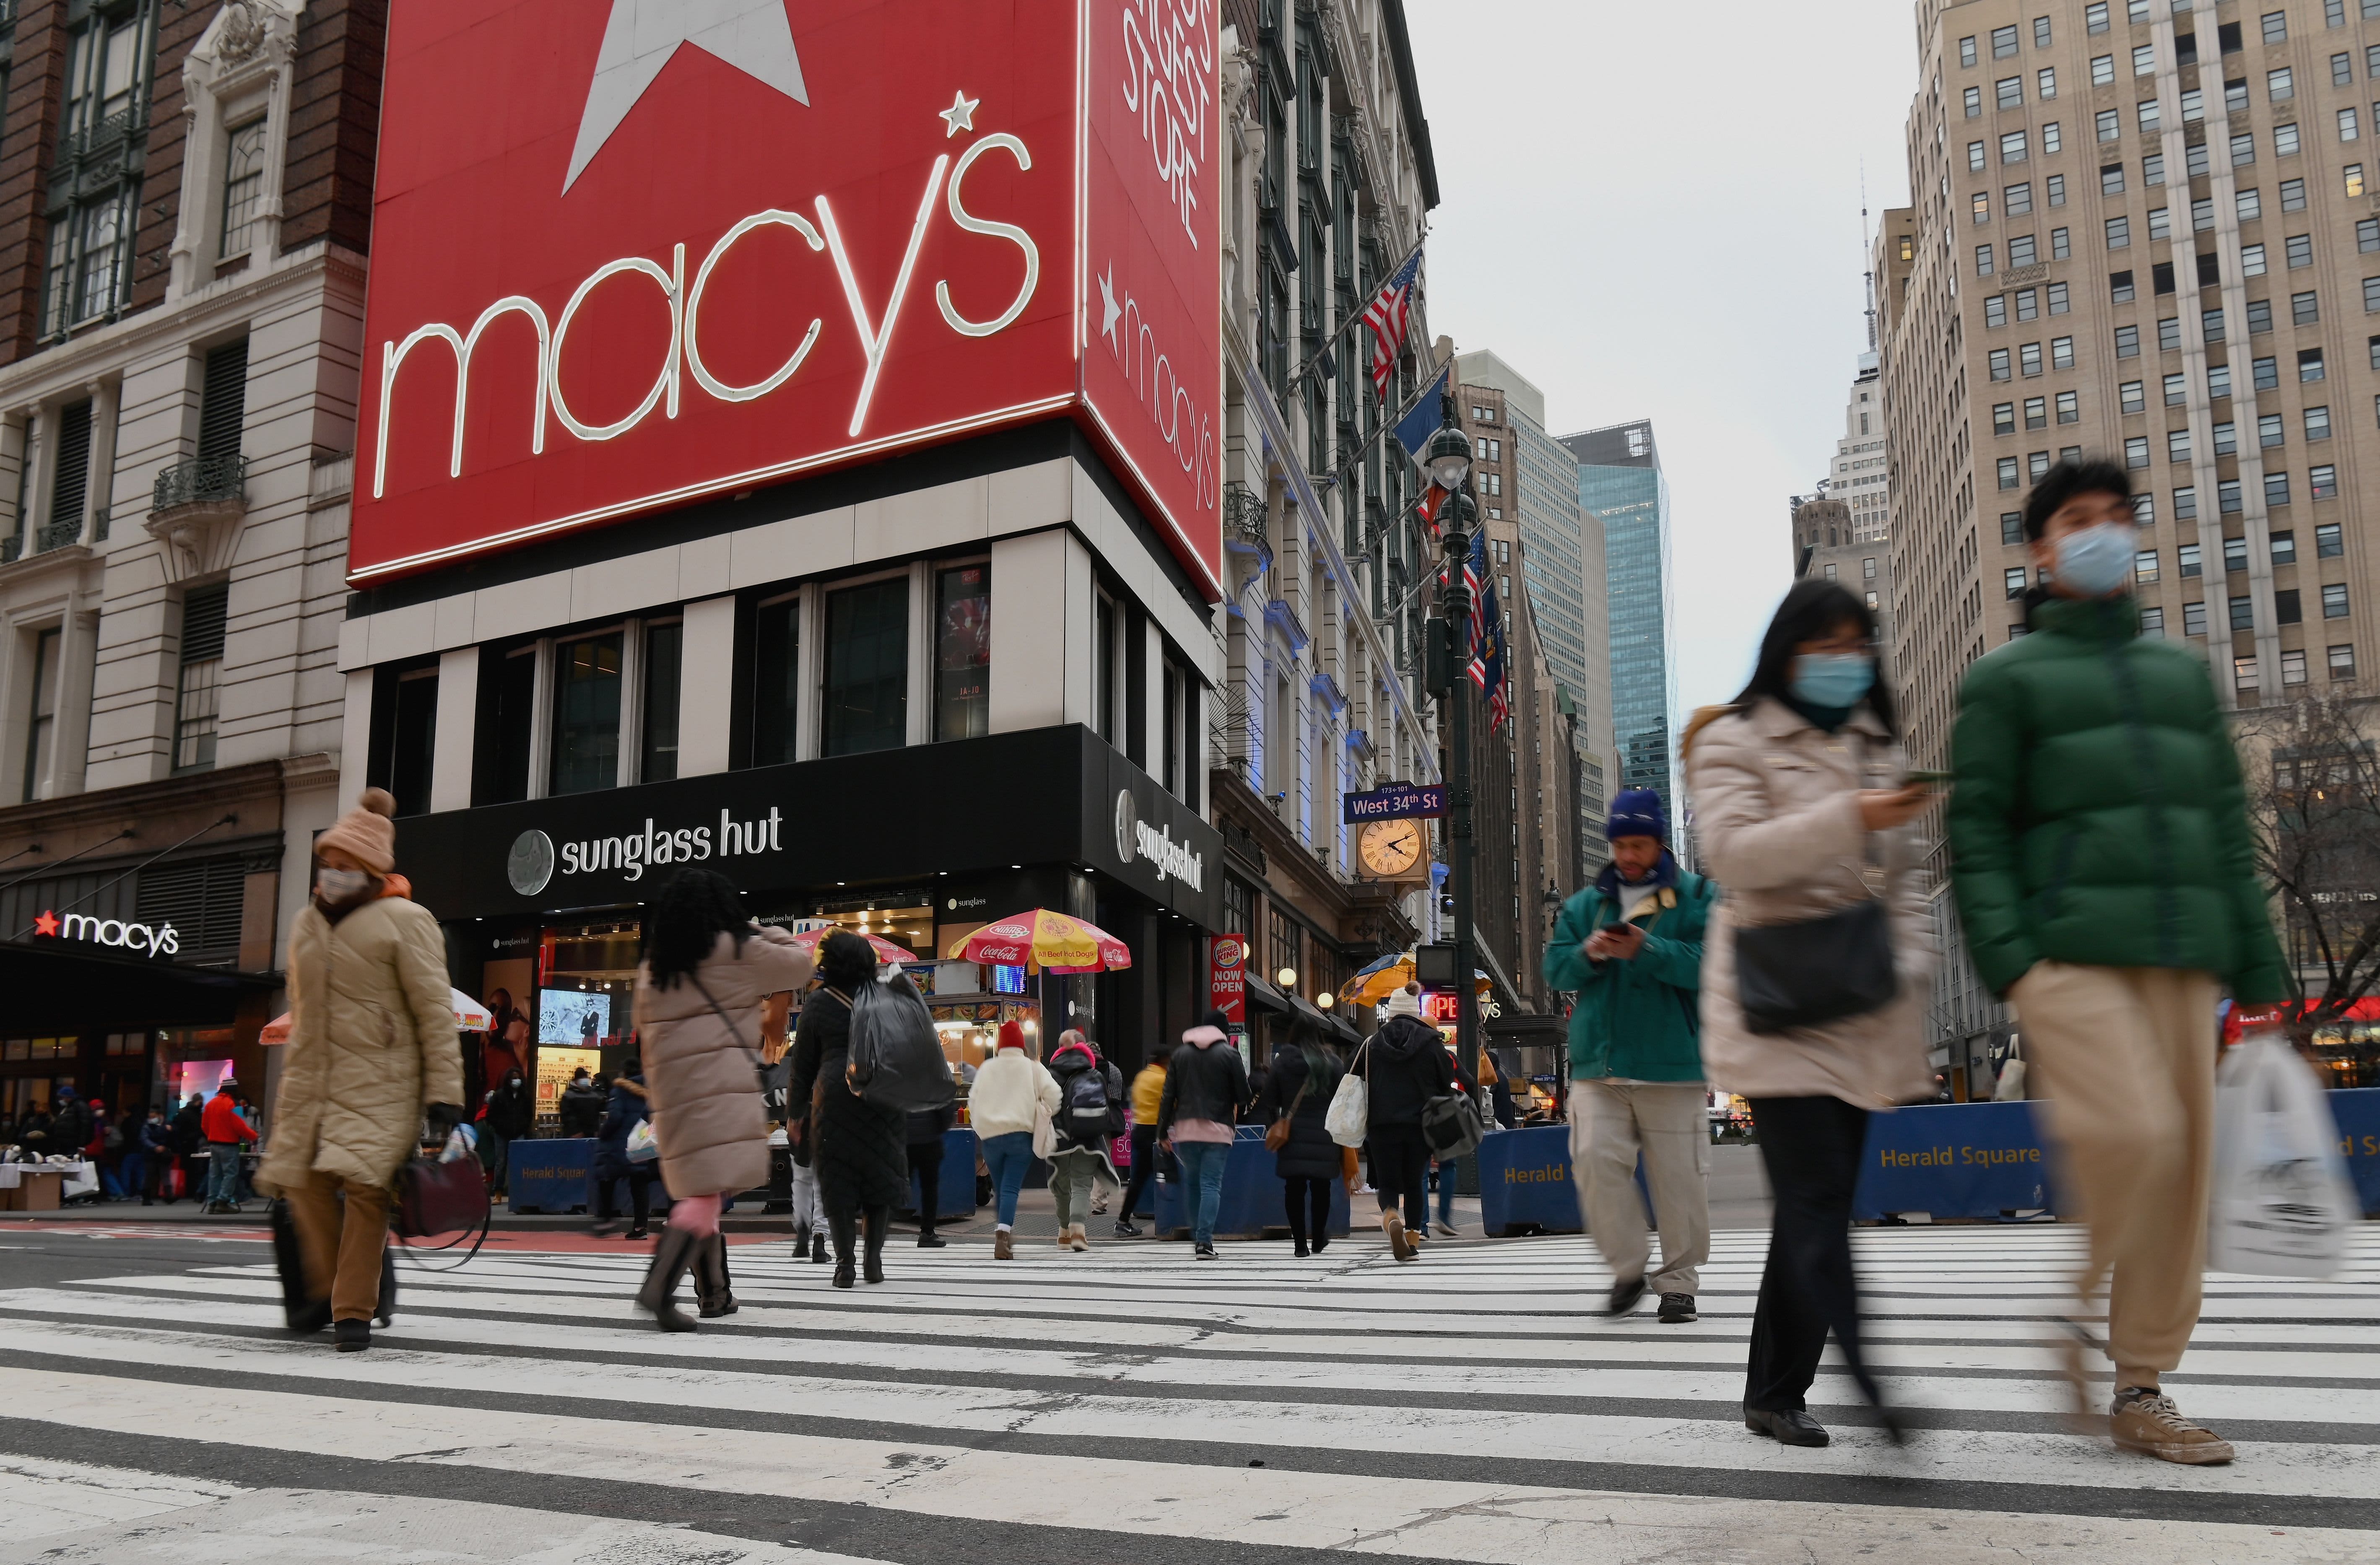 As more retailers turn to tech, Macy's store employees score victory in challenging self-checkout in mobile app - CNBC